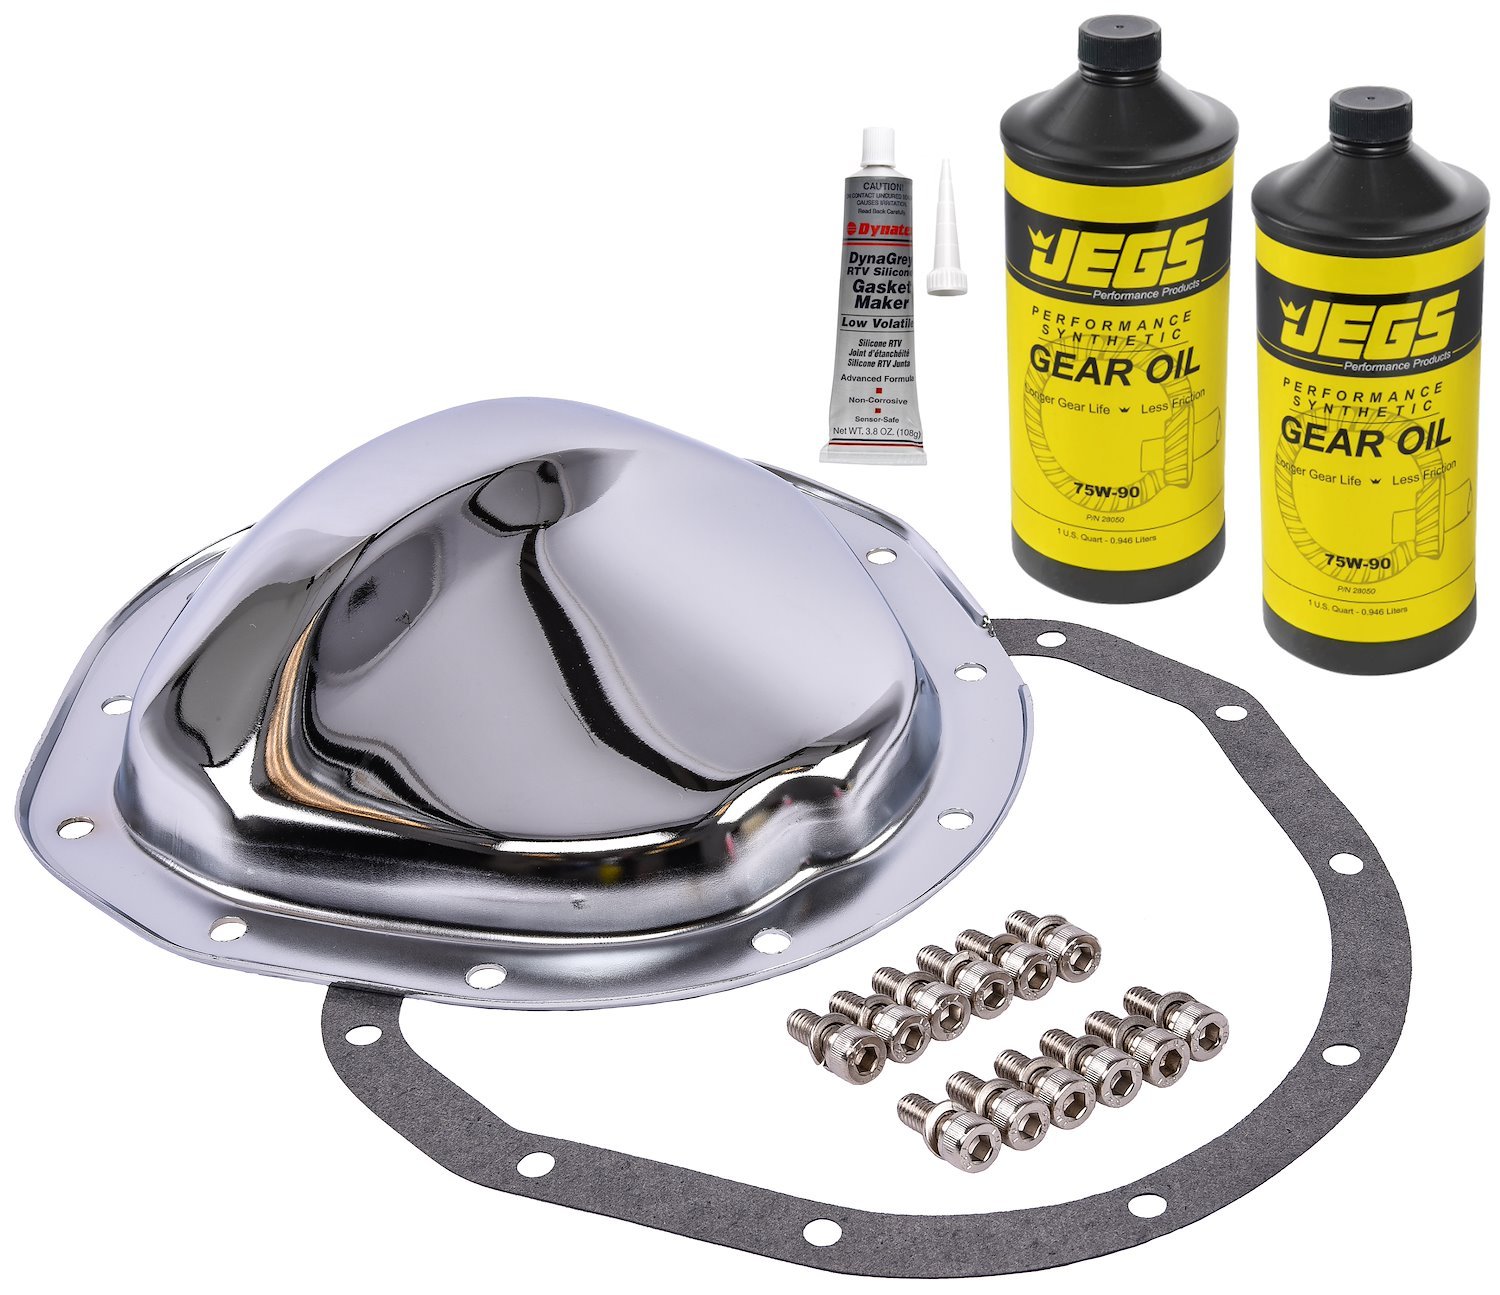 Chrome-Plated Differential Cover & Gear Oil Kit [GM 8.75 in. 12-Bolt]